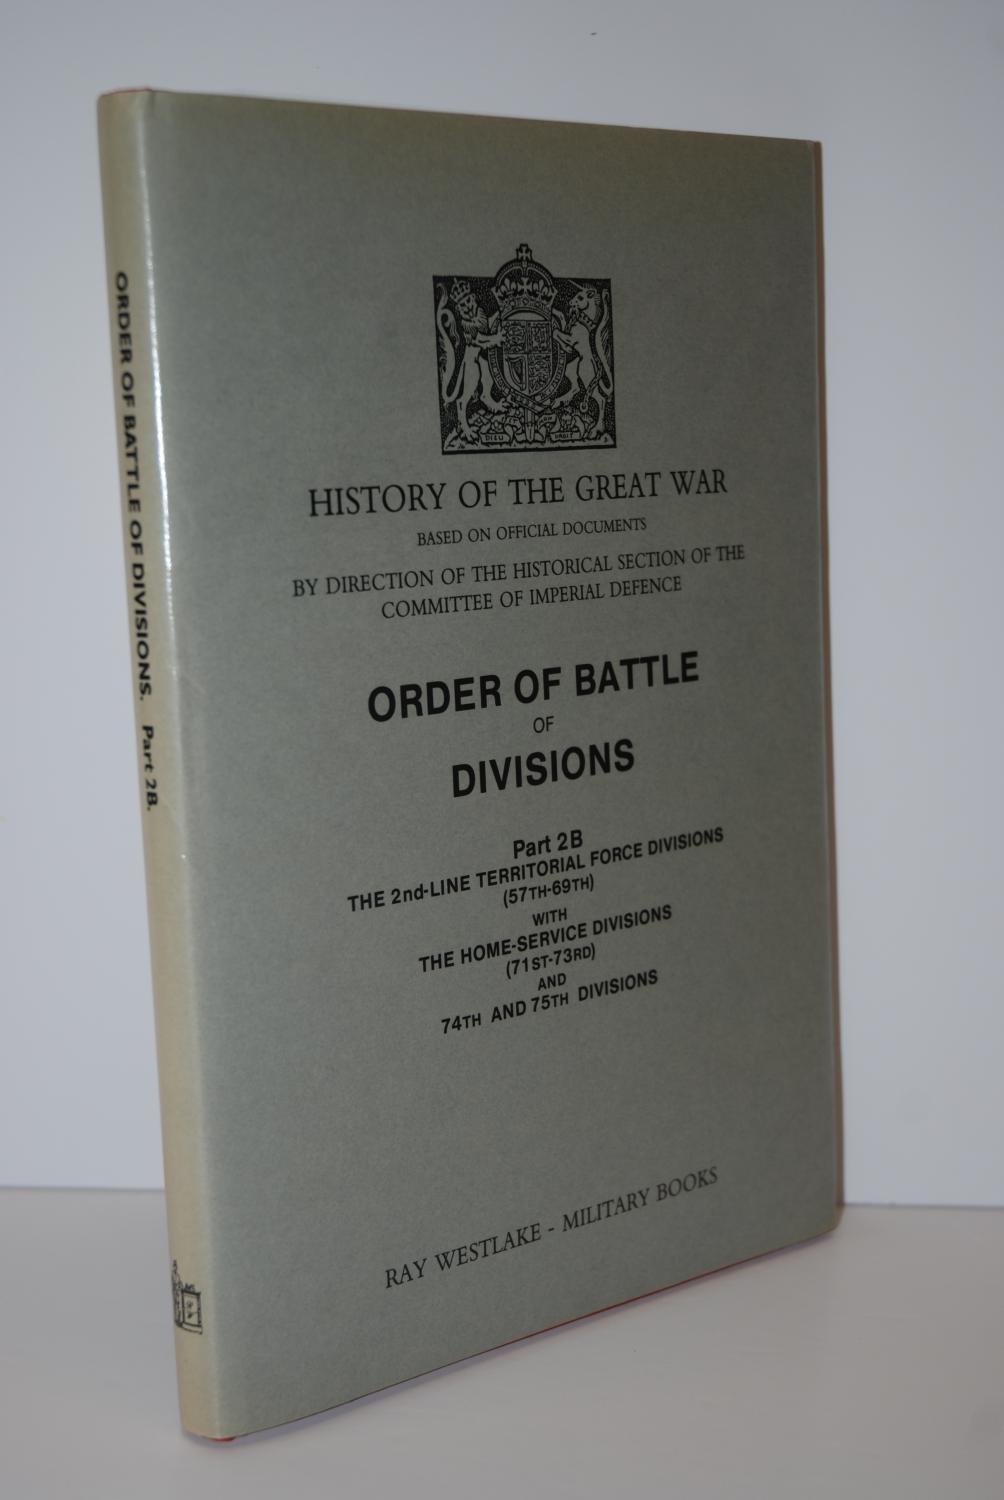 Order of Battle Divisions, Part 2B: the 2nd Line Territorial Force Divisions (57th-69th) with the Home Service Divisions (71st-73rd) and 74th and 75th Divisions. History of the Great War. - A.F., Becke